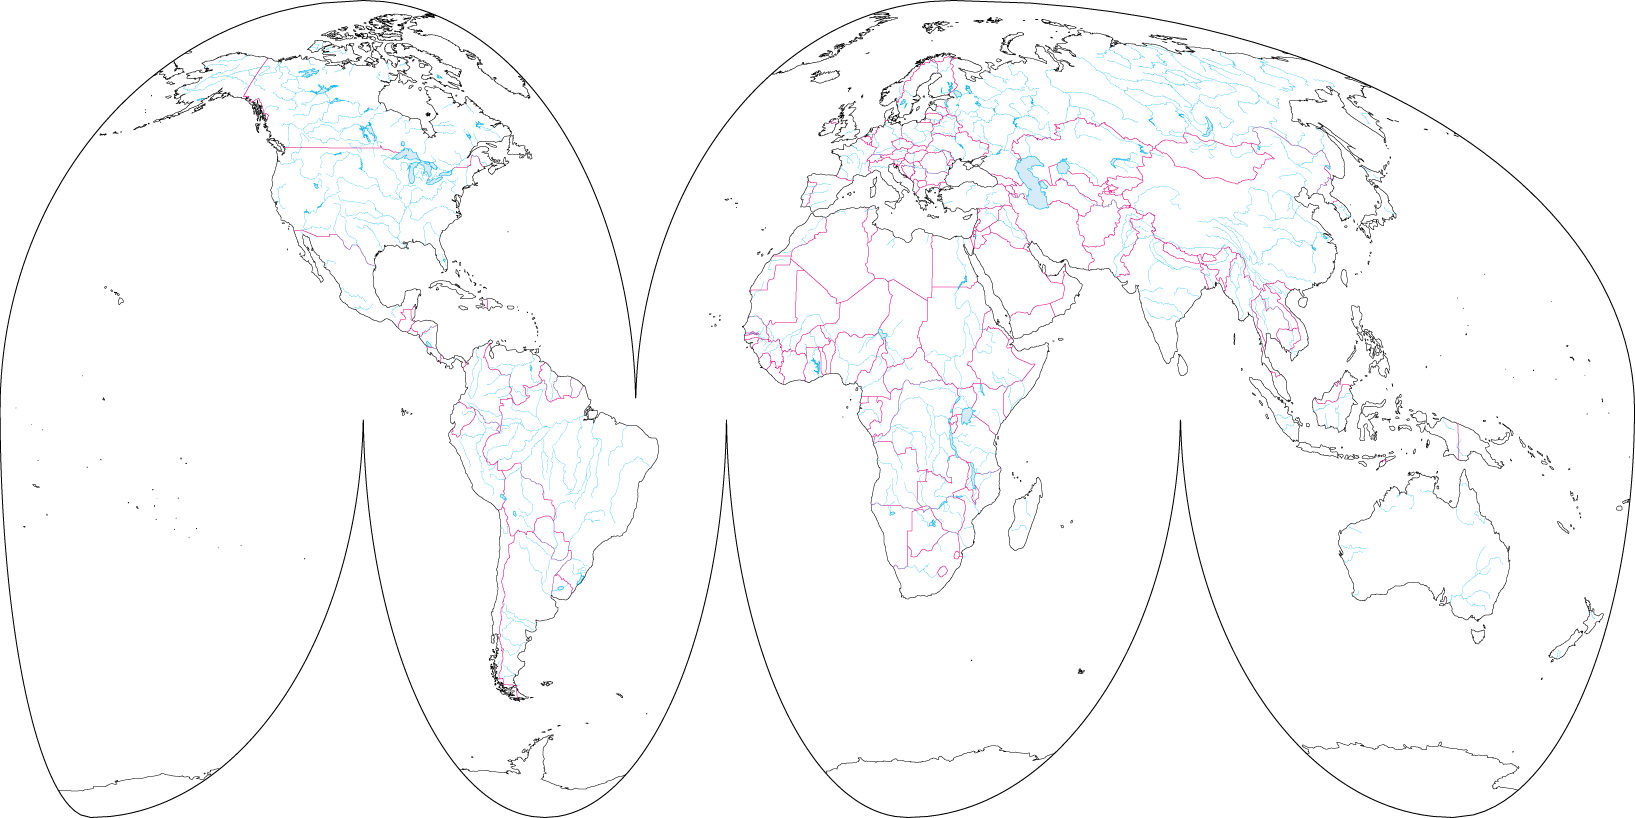 Goode projection (With borders) image